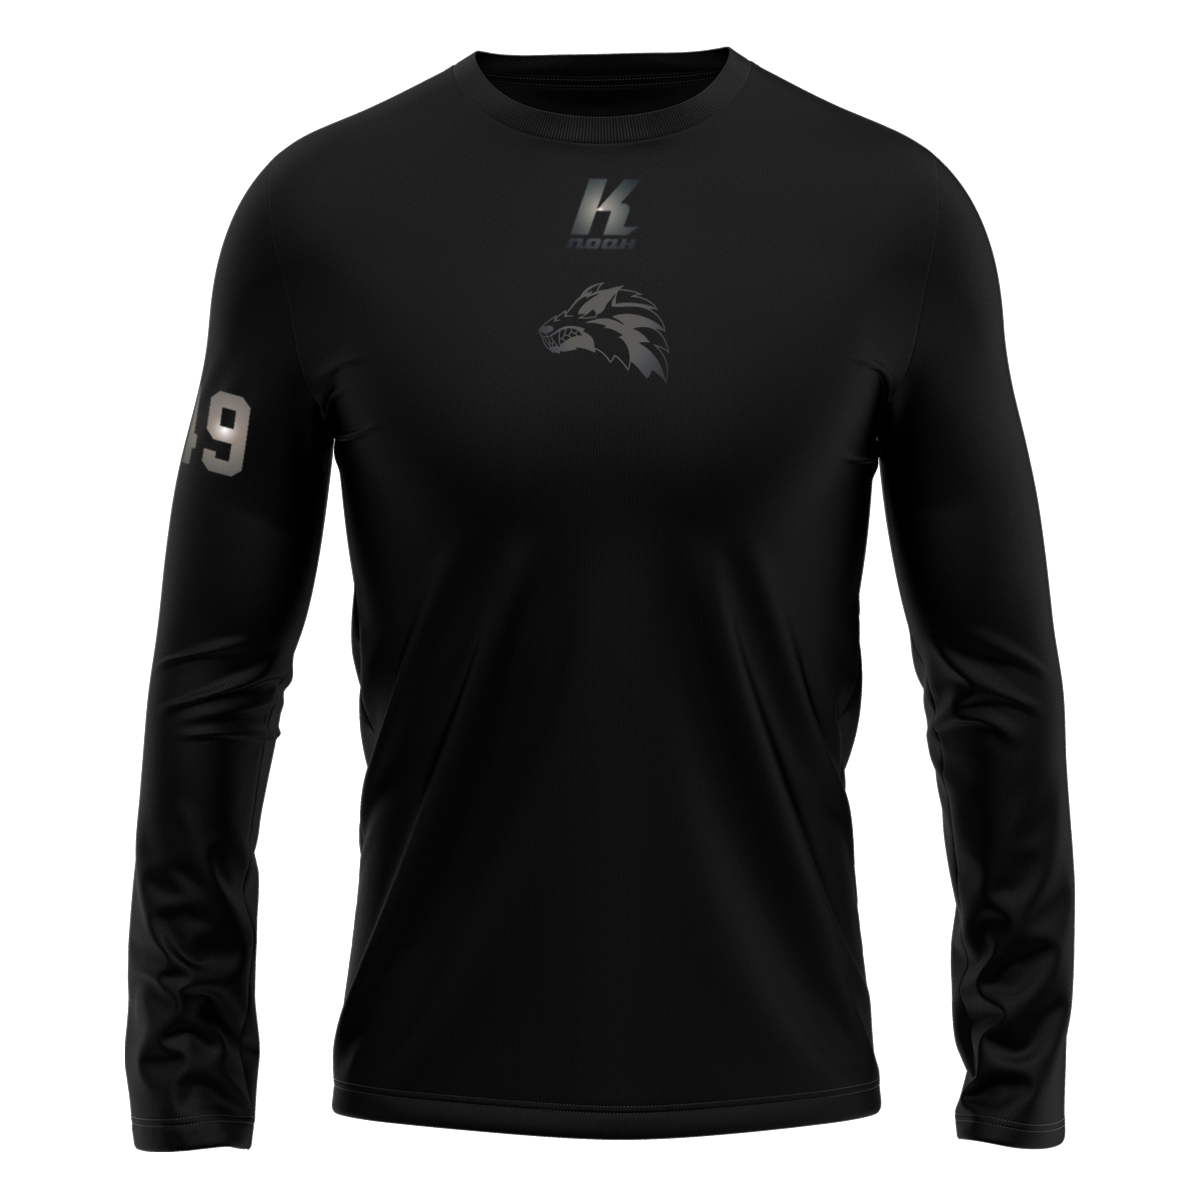 Wolves "Blackline" K.Tech Longsleeve Tee L02071 with Playernumber/Initials